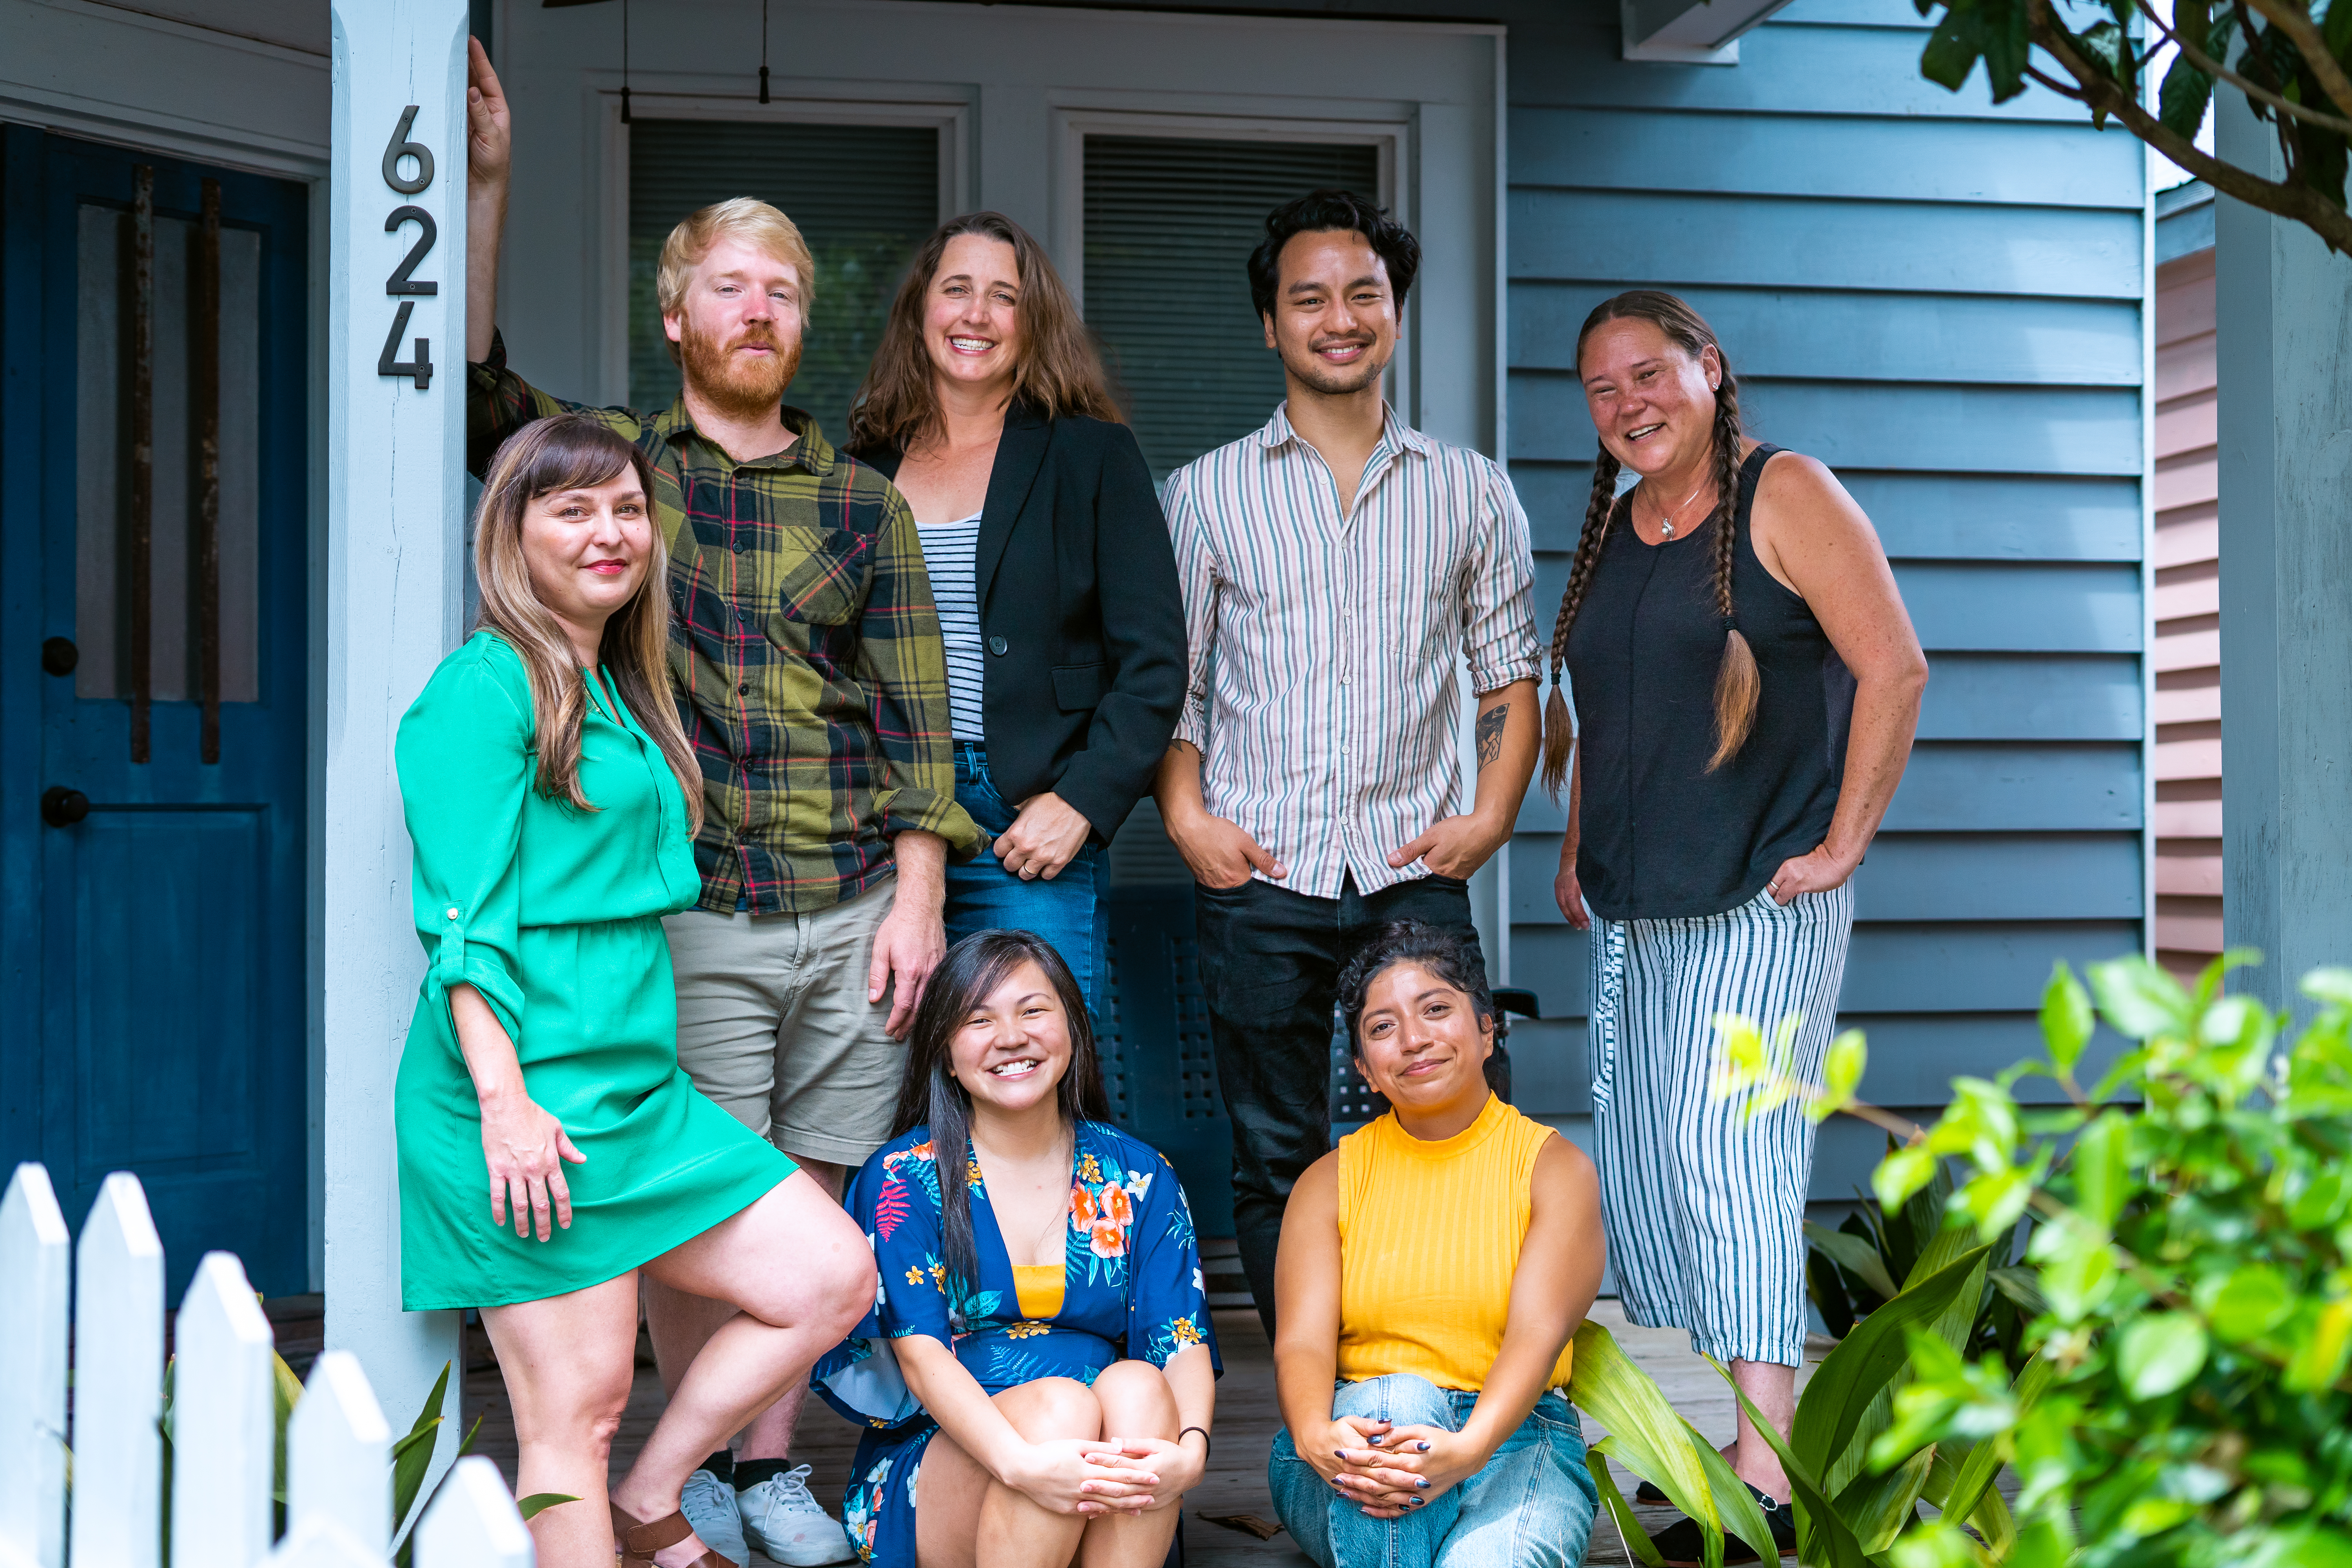 The Working Films staff, posing in front of a blue house: (Standing L-R) Molly Murphy, Andy Myers, Anna Lee, Gerry Leonard, Stephanie Avery. (Seated L-R) Hannah Hearn, Amalia Renteria. Photo by Tory Silinski.